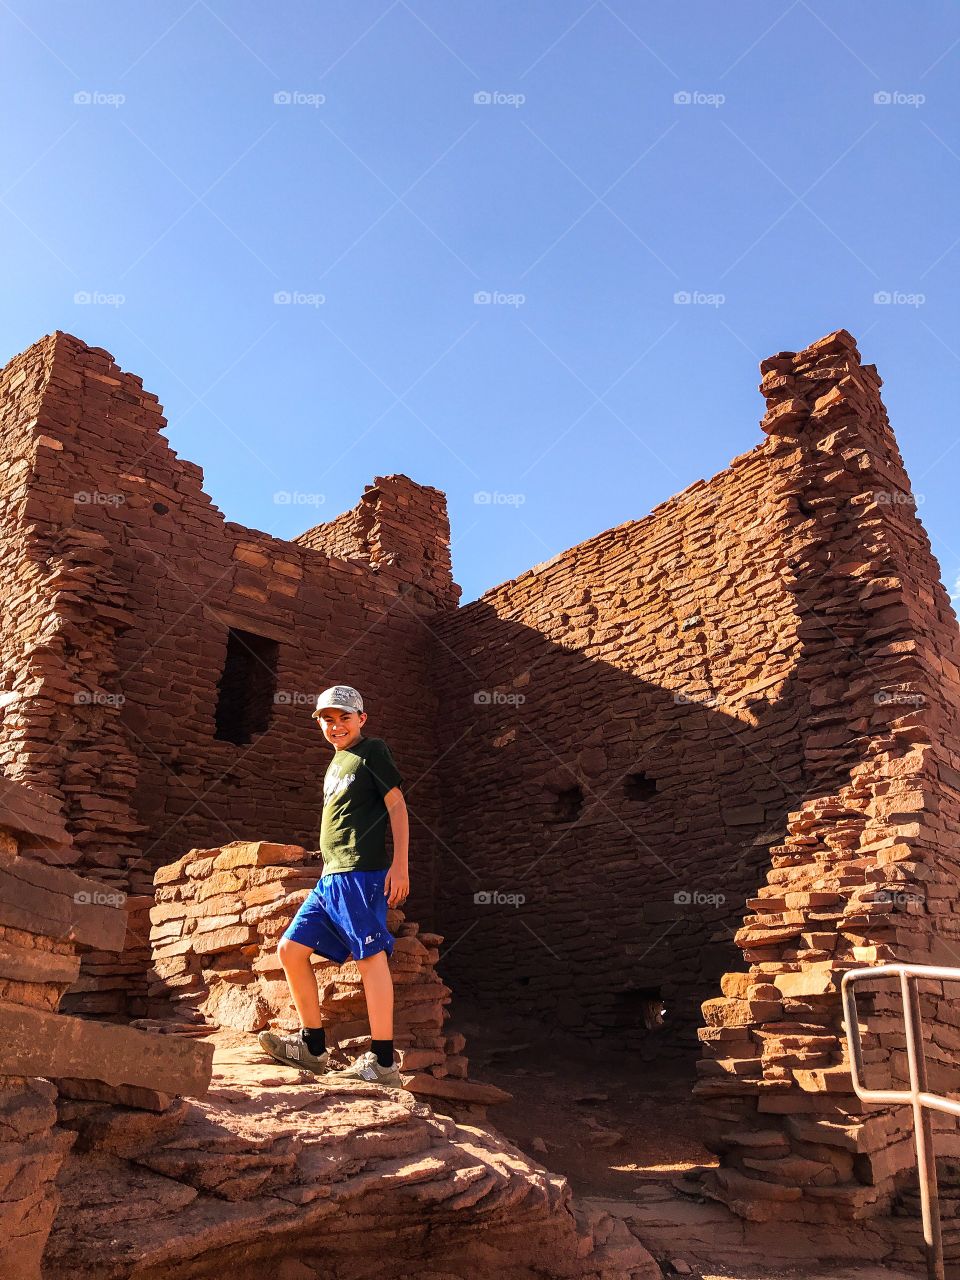 My little brother in front of a Pueblo ruin in Arizona 